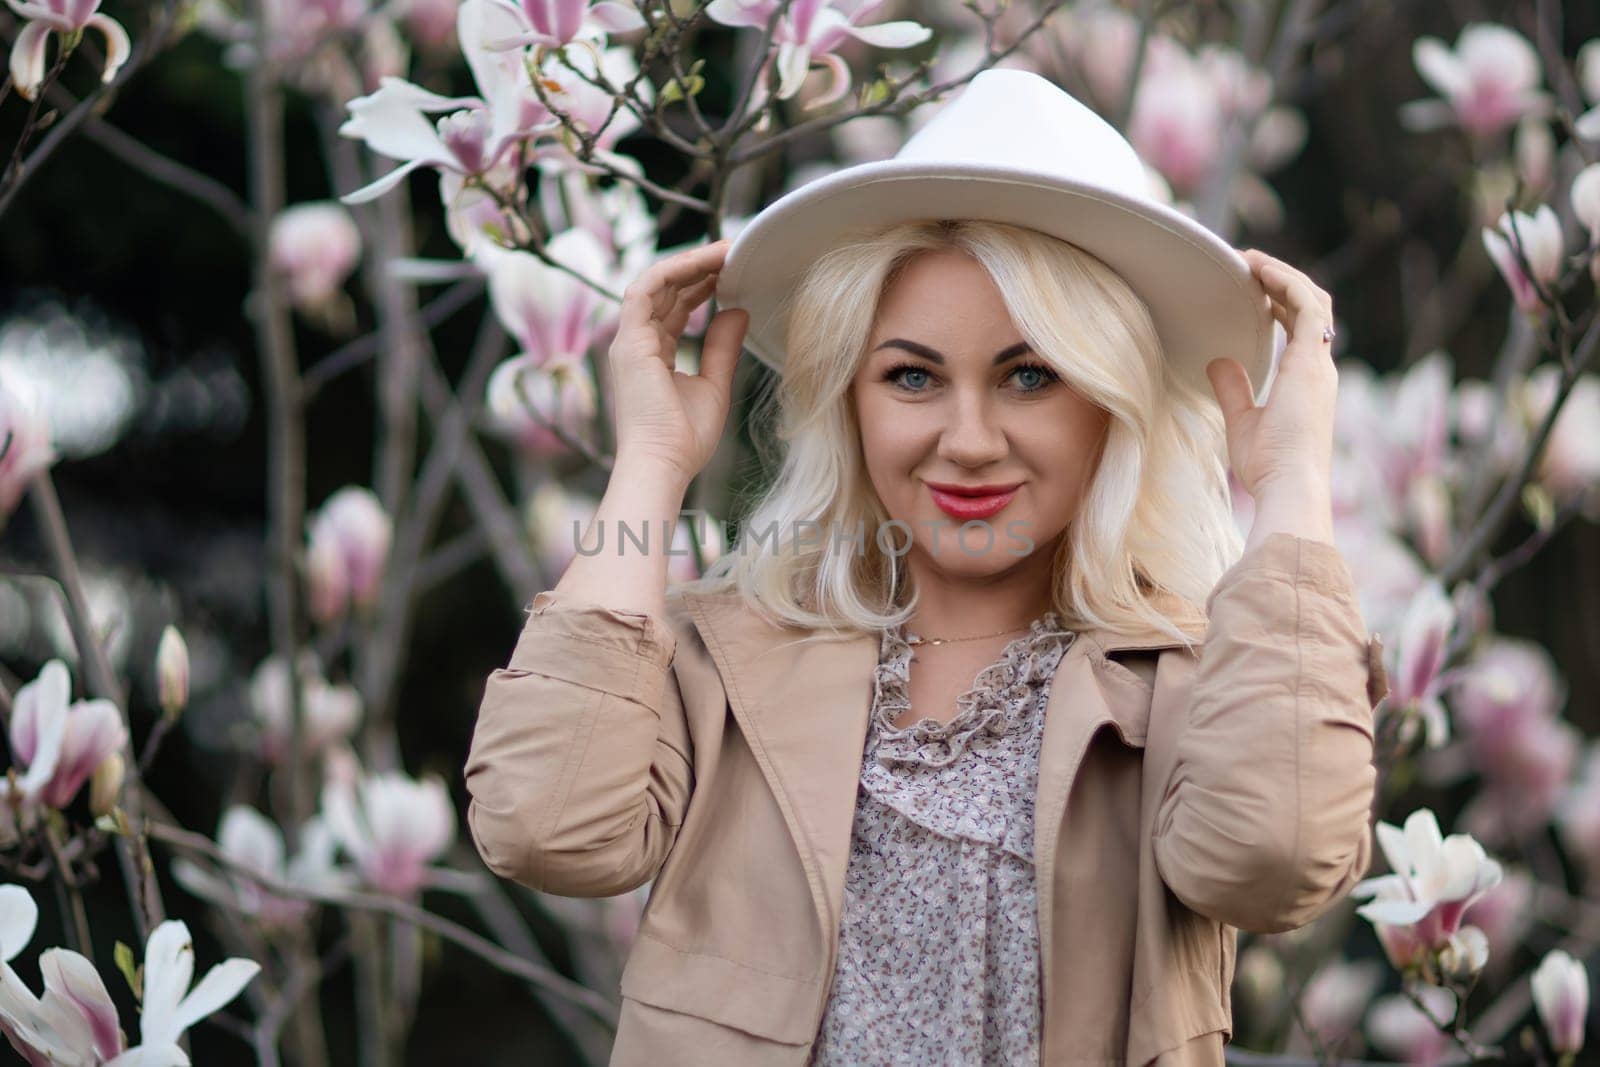 Magnolia flowers woman. A blonde woman wearing a white hat stands in front of a tree with pink flowers. She has a smile on her face and she is enjoying the beautiful scenery